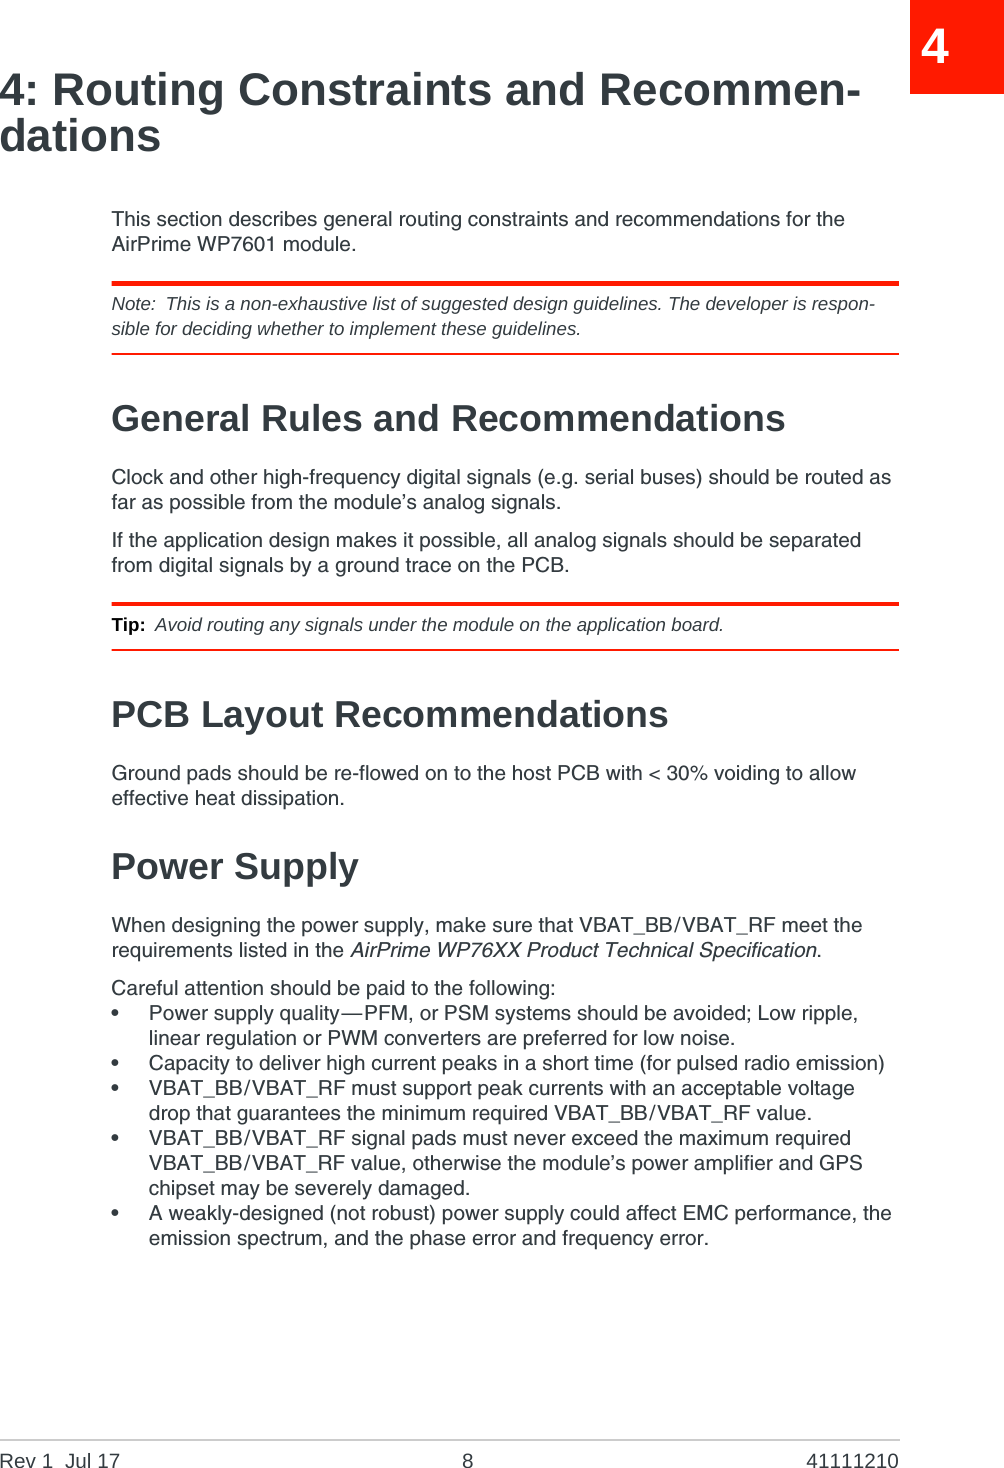 Rev 1  Jul 17 8 4111121044: Routing Constraints and Recommen-dationsThis section describes general routing constraints and recommendations for the AirPrime WP7601 module.Note: This is a non-exhaustive list of suggested design guidelines. The developer is respon-sible for deciding whether to implement these guidelines.General Rules and RecommendationsClock and other high-frequency digital signals (e.g. serial buses) should be routed as far as possible from the module’s analog signals.If the application design makes it possible, all analog signals should be separated from digital signals by a ground trace on the PCB.Tip: Avoid routing any signals under the module on the application board.PCB Layout RecommendationsGround pads should be re-flowed on to the host PCB with &lt; 30% voiding to allow effective heat dissipation.Power SupplyWhen designing the power supply, make sure that VBAT_BB/VBAT_RF meet the requirements listed in the AirPrime WP76XX Product Technical Specification.Careful attention should be paid to the following:•Power supply quality—PFM, or PSM systems should be avoided; Low ripple, linear regulation or PWM converters are preferred for low noise.•Capacity to deliver high current peaks in a short time (for pulsed radio emission)•VBAT_BB/VBAT_RF must support peak currents with an acceptable voltage drop that guarantees the minimum required VBAT_BB/VBAT_RF value.•VBAT_BB/VBAT_RF signal pads must never exceed the maximum required VBAT_BB/VBAT_RF value, otherwise the module’s power amplifier and GPS chipset may be severely damaged.•A weakly-designed (not robust) power supply could affect EMC performance, the emission spectrum, and the phase error and frequency error.